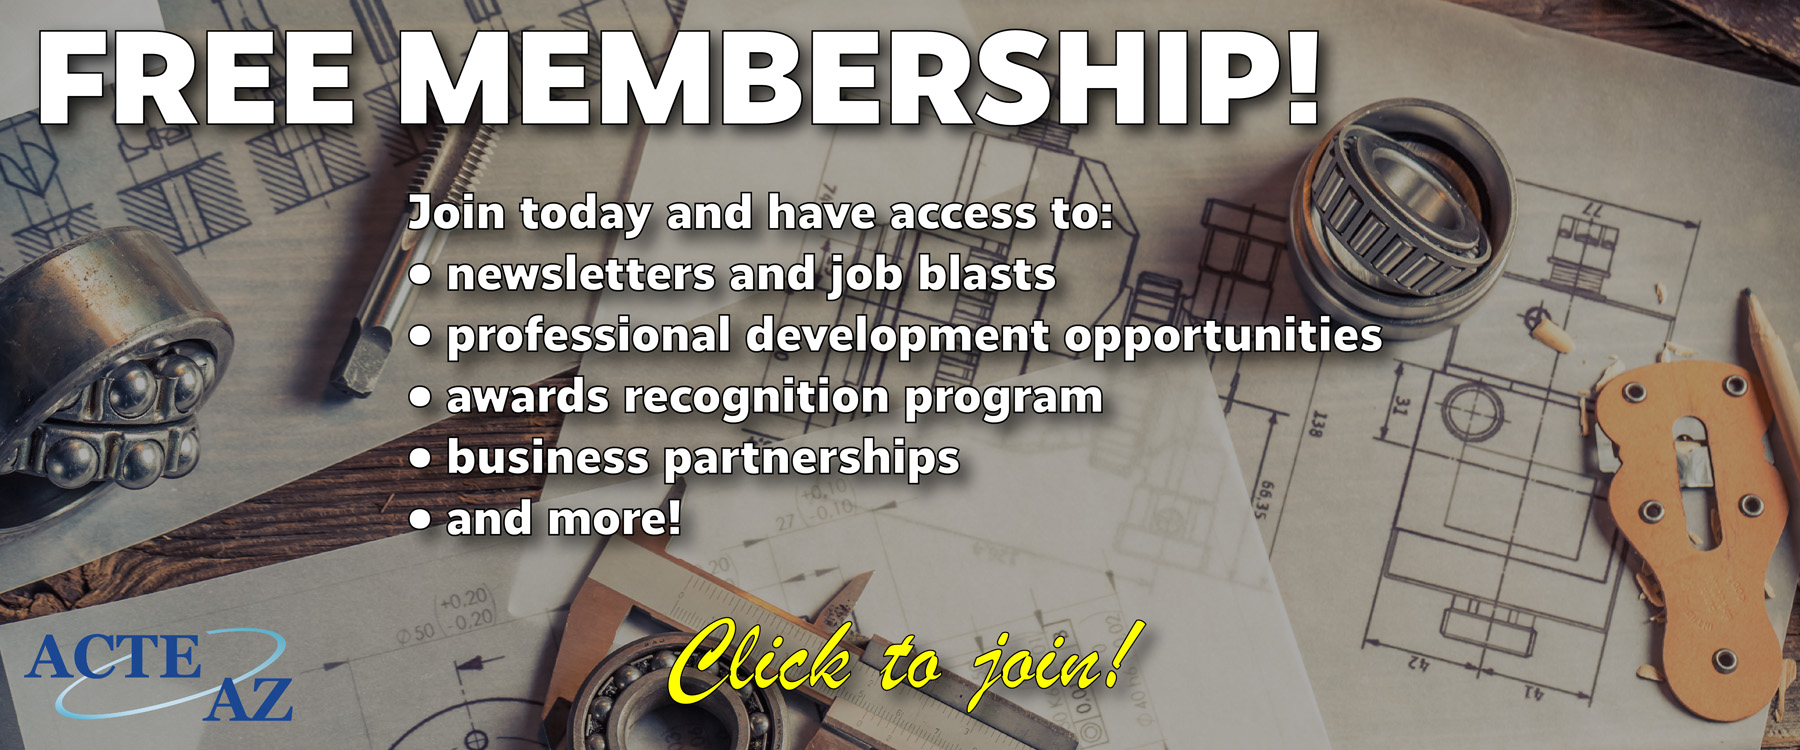 FREE MEMBERSHIP! Join today and have access to newsletters and job blasts, professional development opportunities, awards recognition program, business partnerships and more! Click to join!